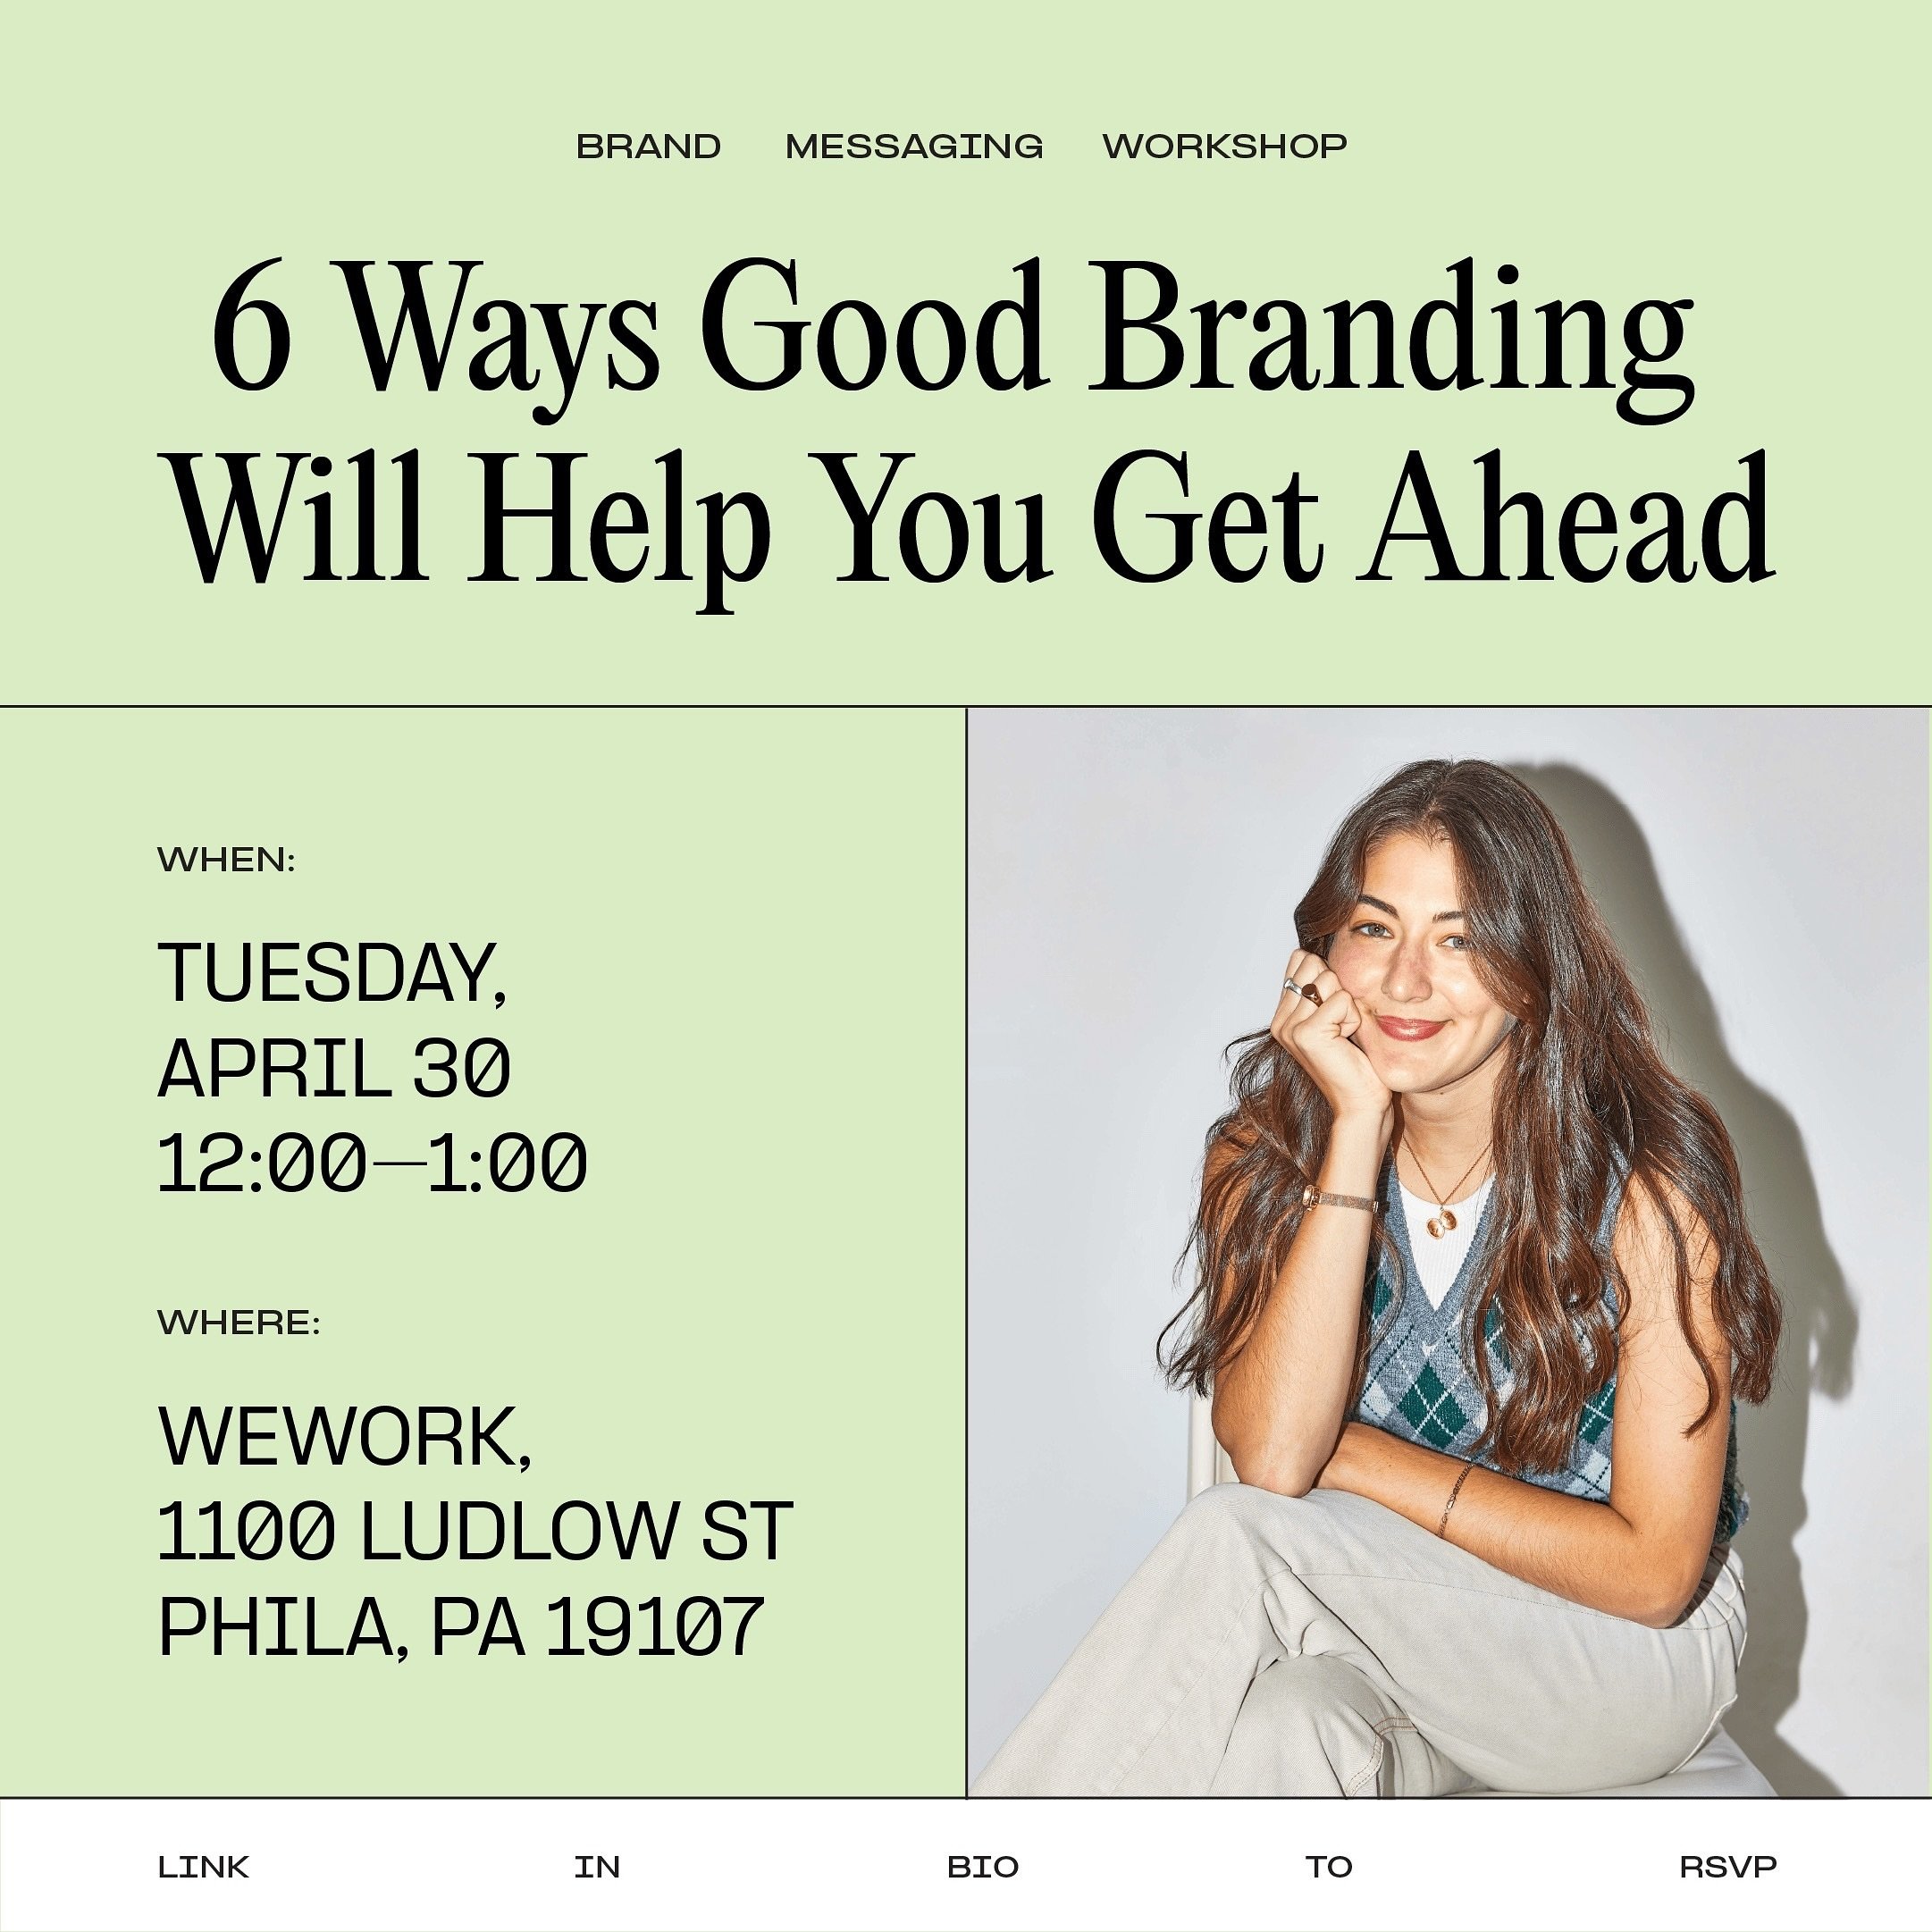 Come hang and listen to me talk about branding next Tuesday! Includes a free lunch and a fun opportunity to link up with other members of the small business community💪 link in our bio to RSVP! (Spots are limited)